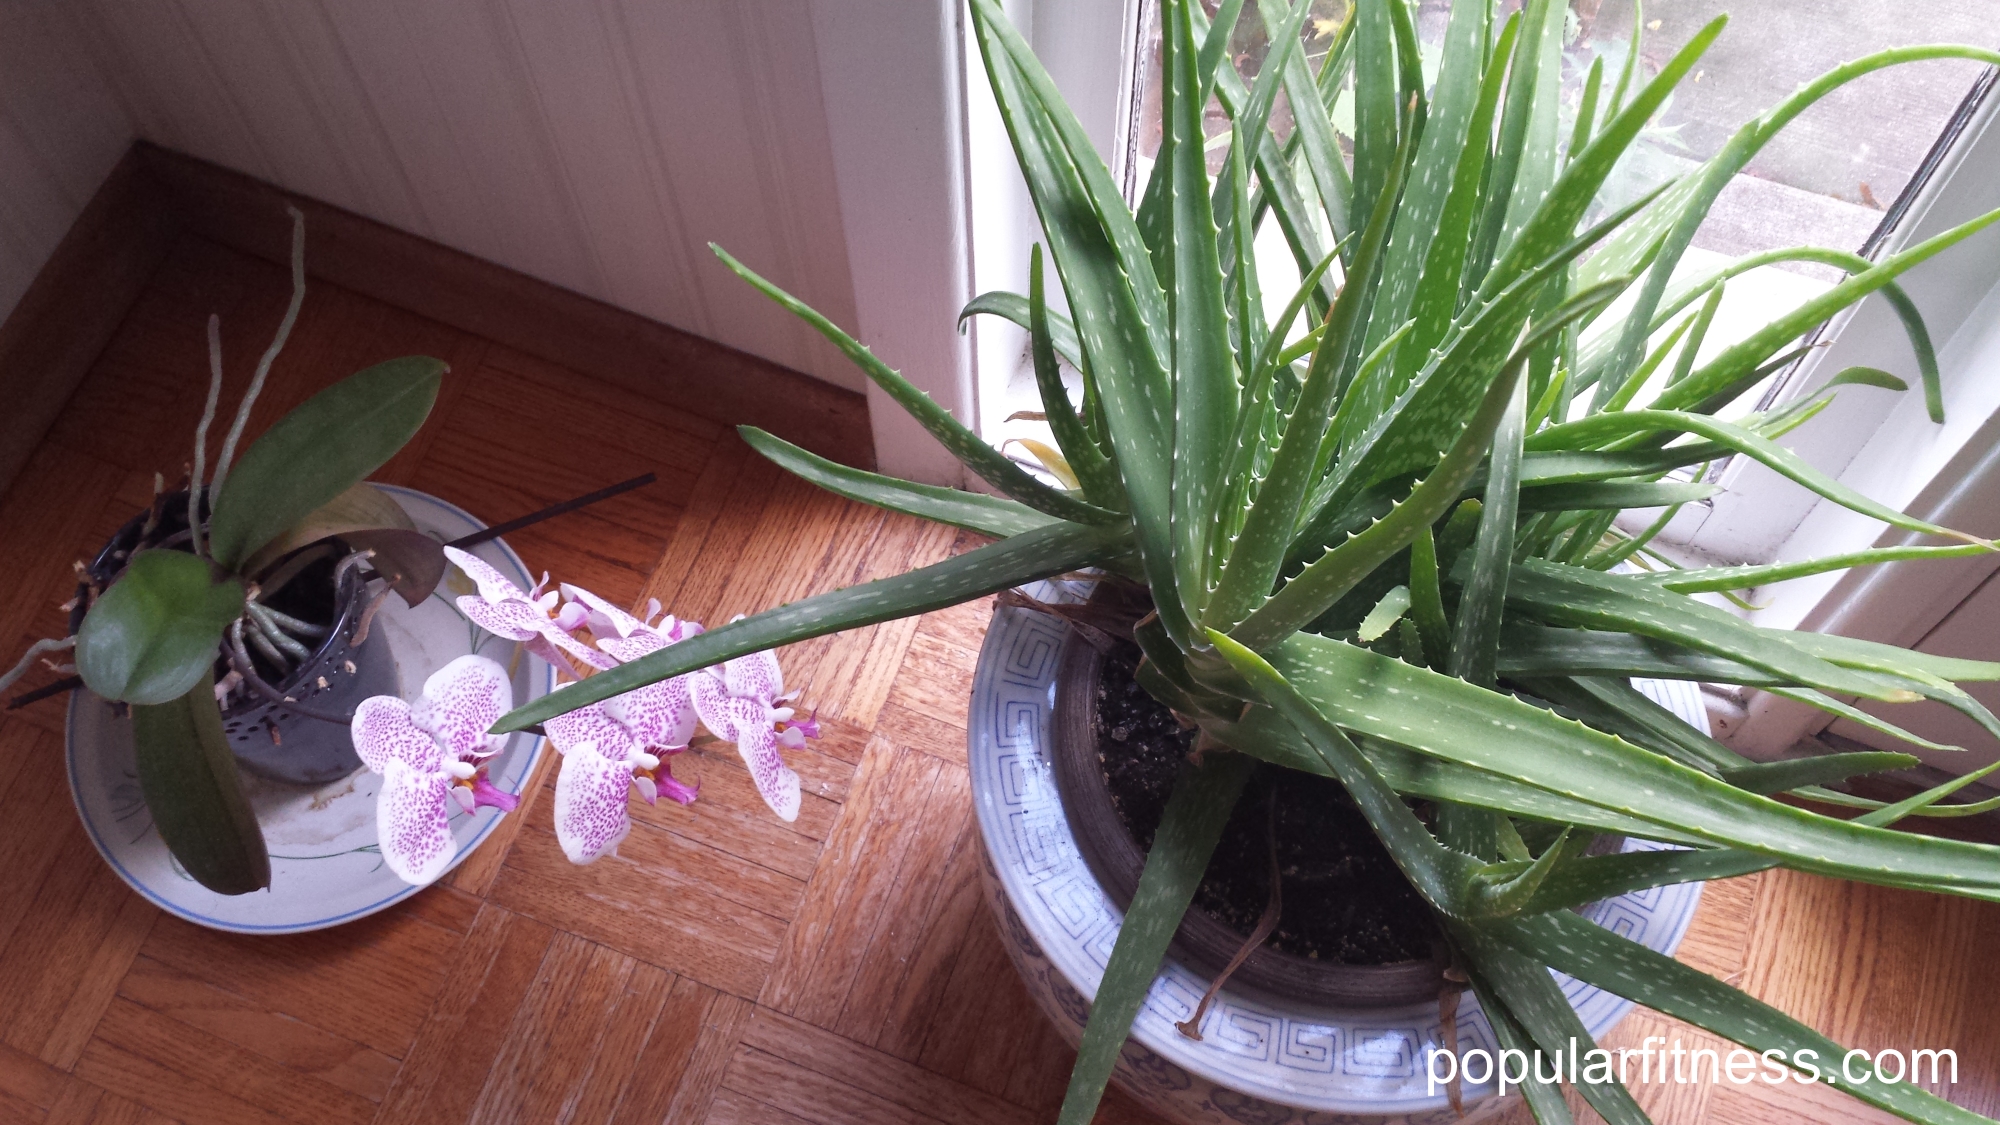 Aloe plant - Orchid blooming